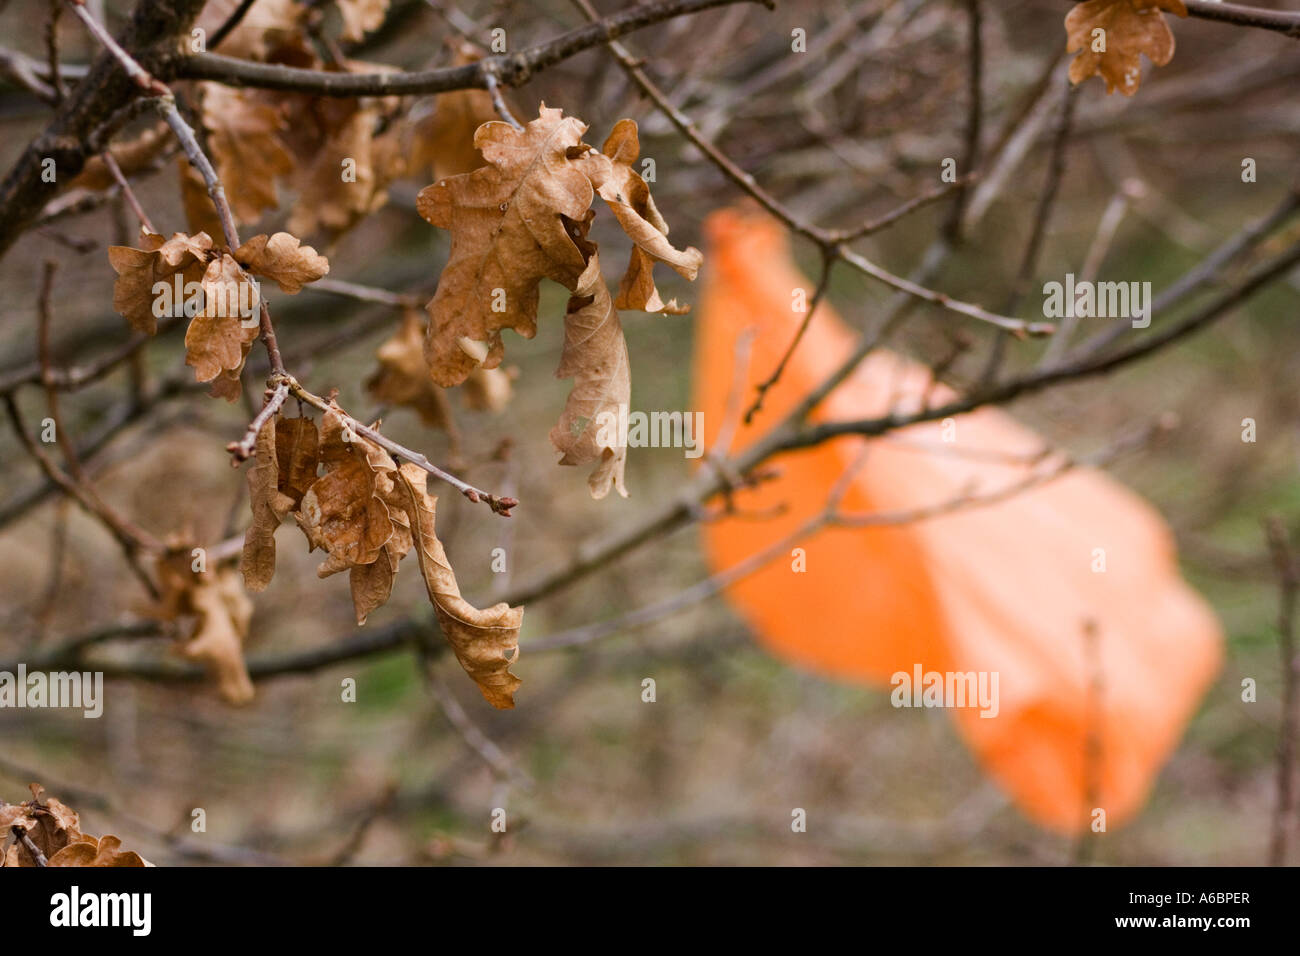 MUTANT. Defocused in the background, a plastic orange bag hangs from a tree, mirroring the shape of the brown leaves. Stock Photo